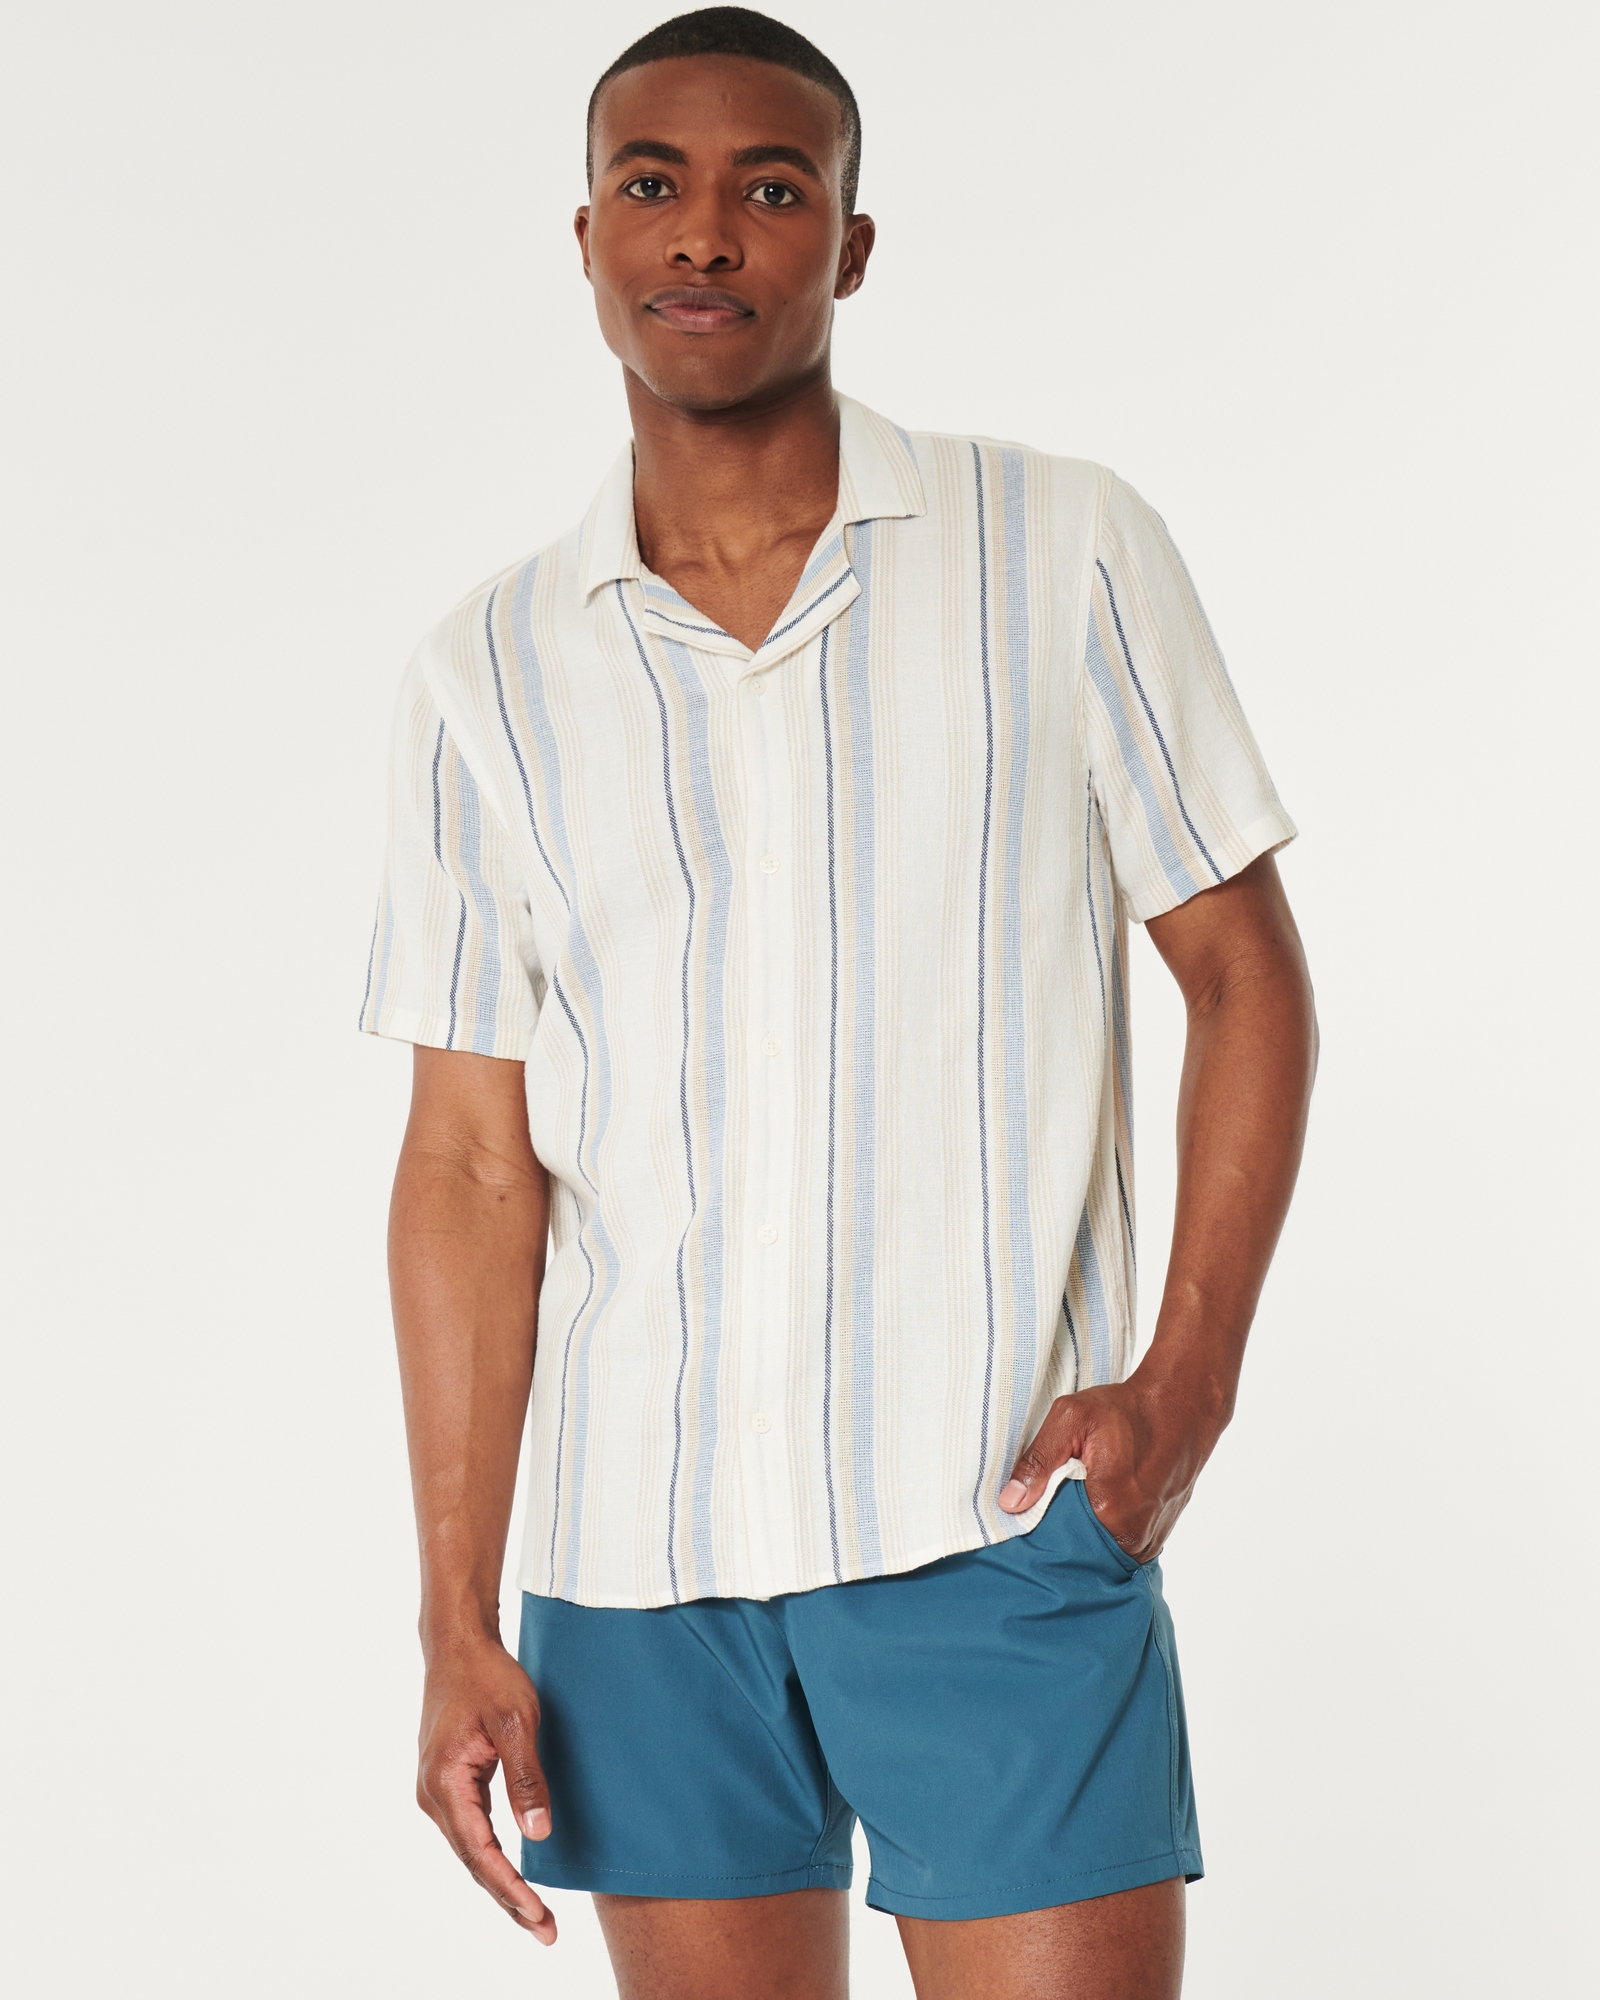 Hollister button front shirt in blue and white stripe